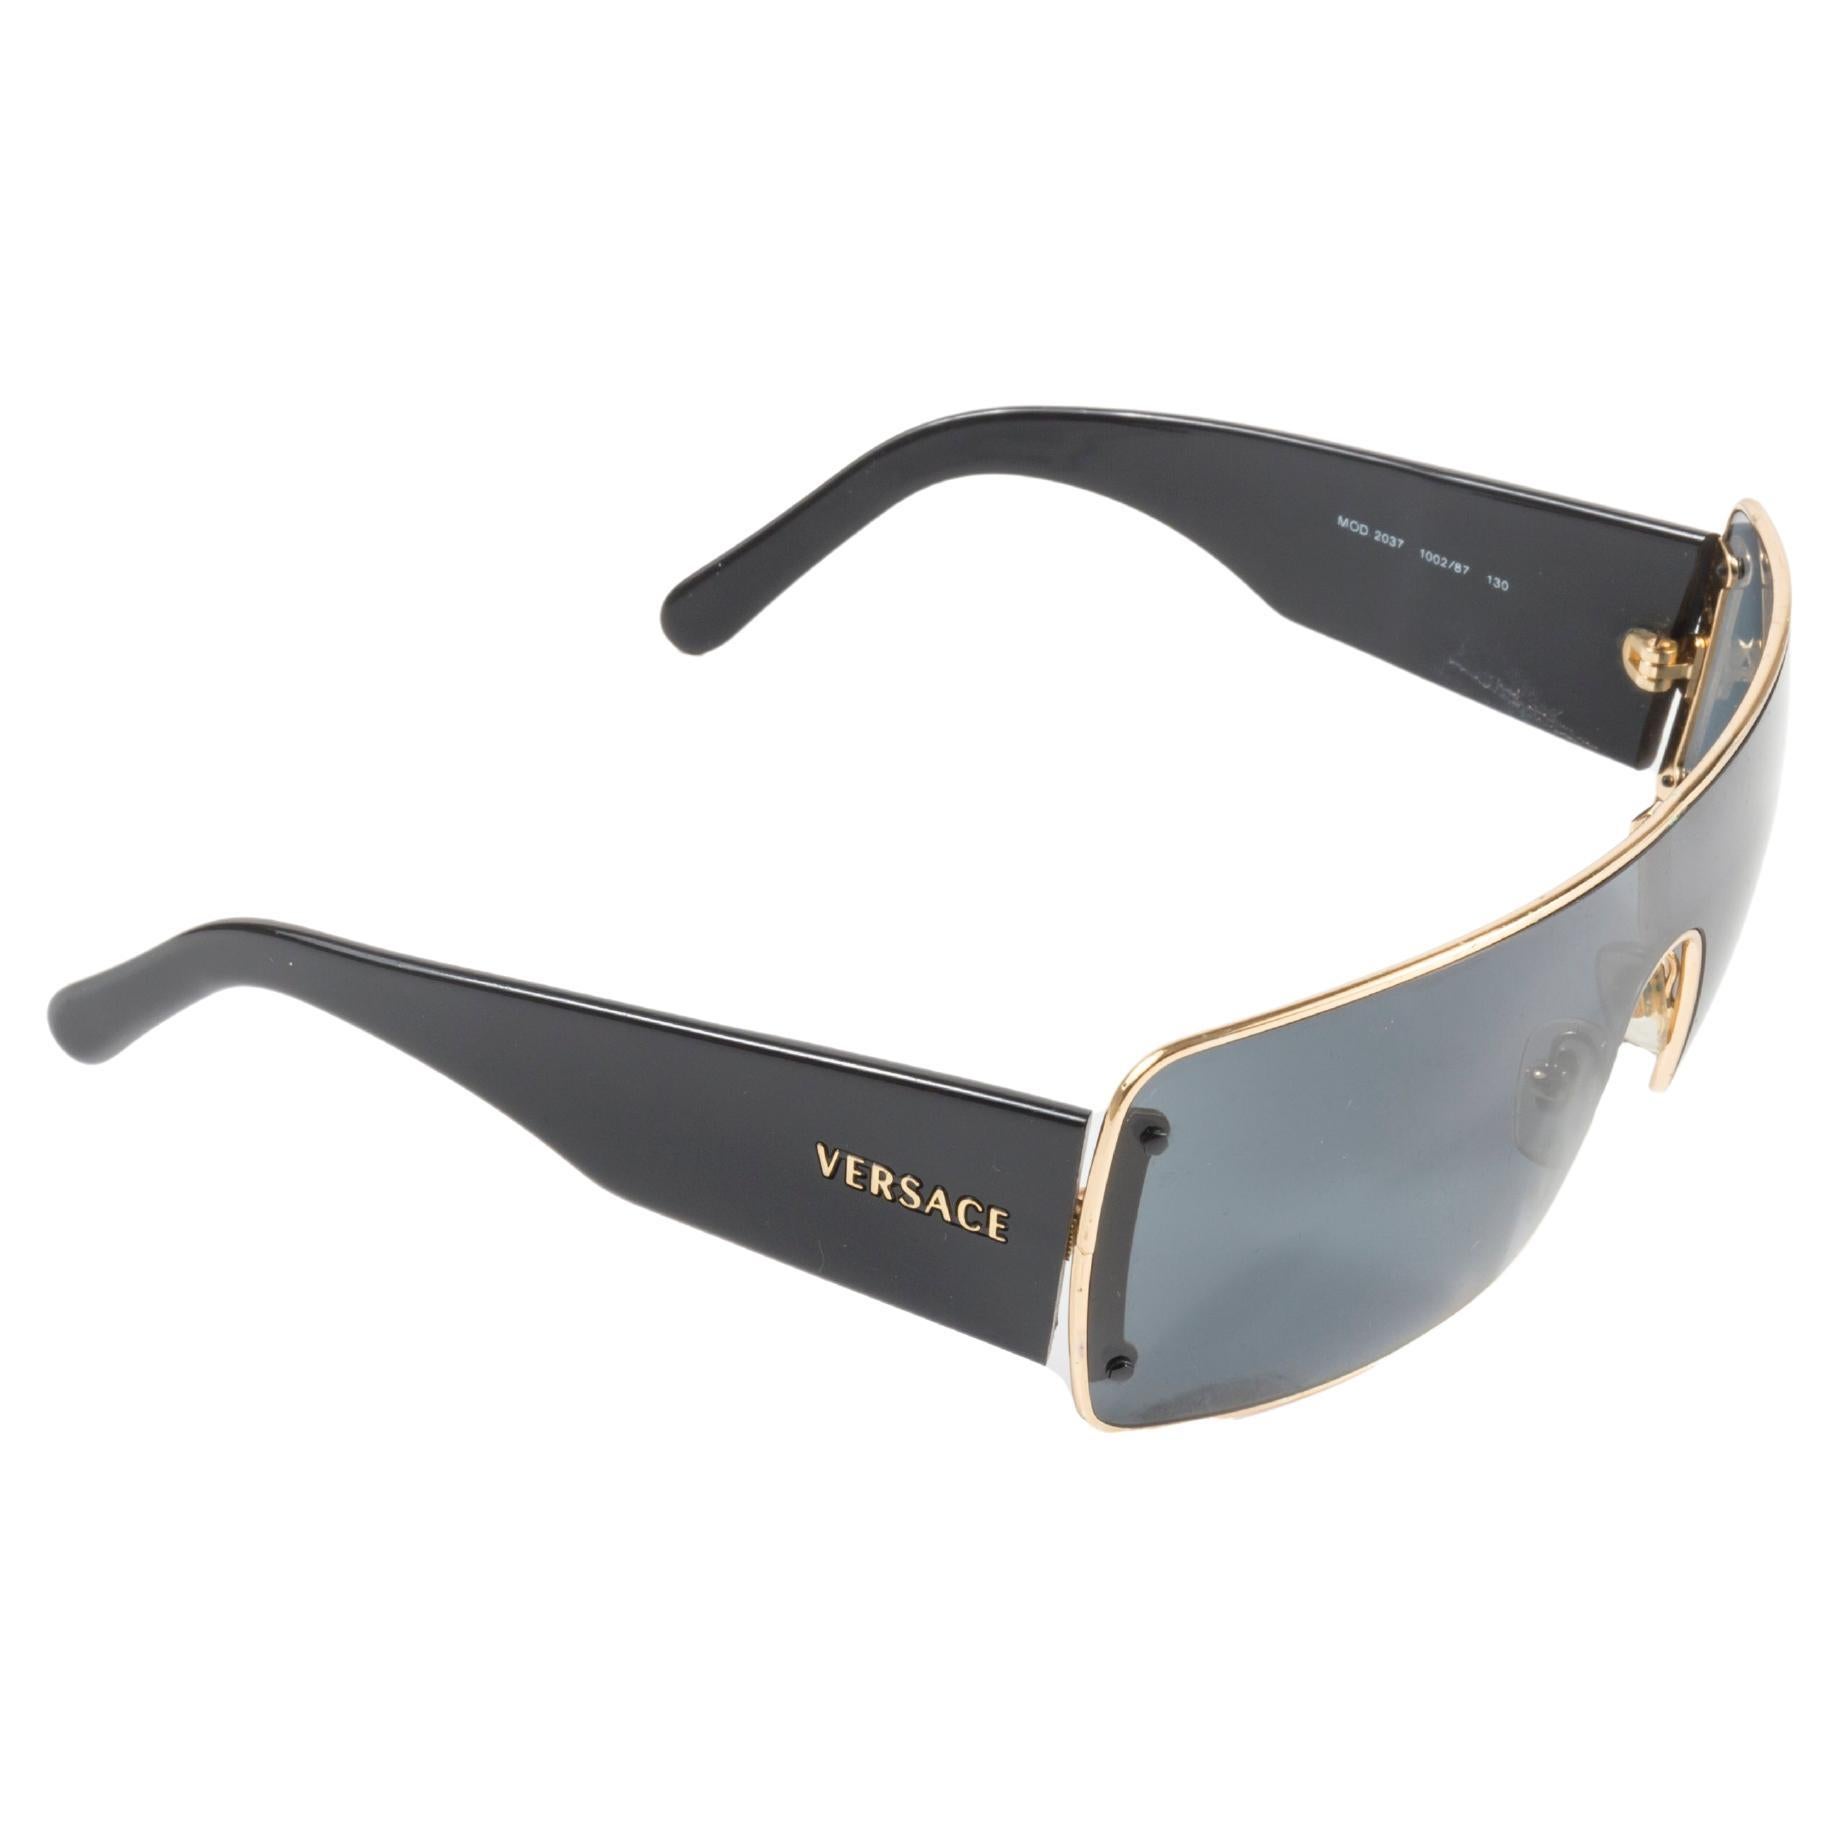 Versace black and gold mask sunglasses, mid 2000s